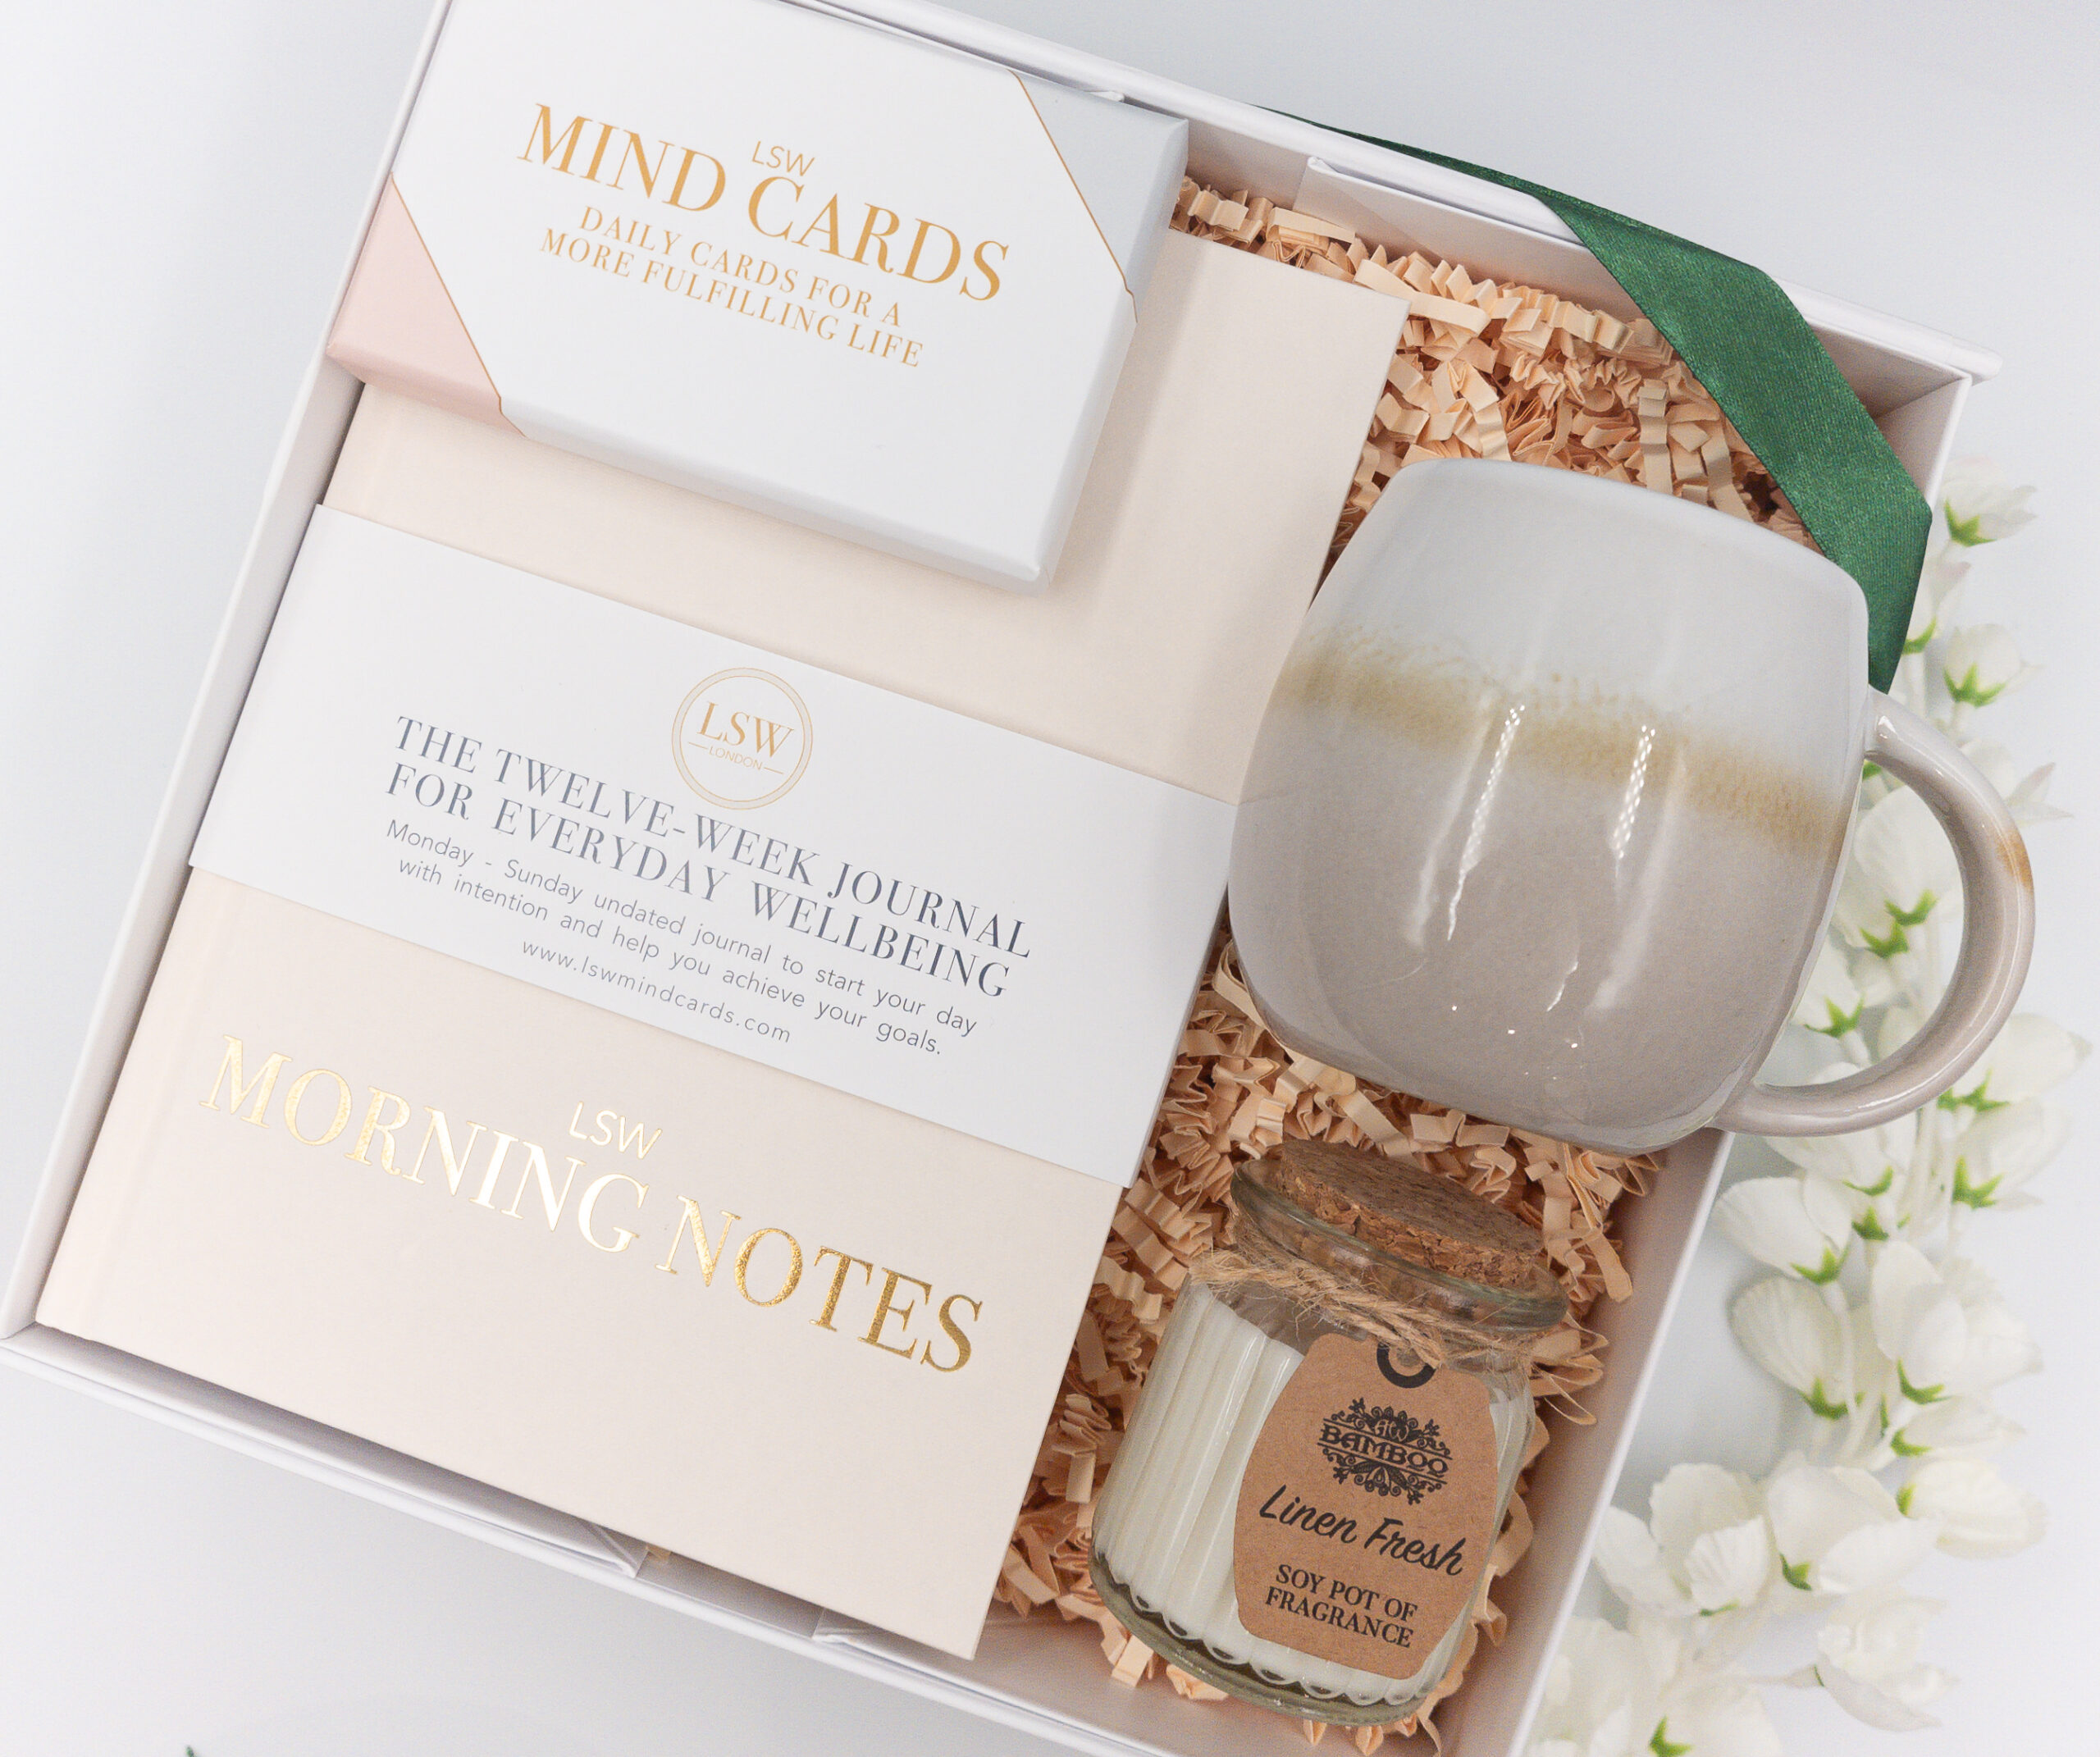 morning self care gift box with morning notes, mind cards, mug and candle